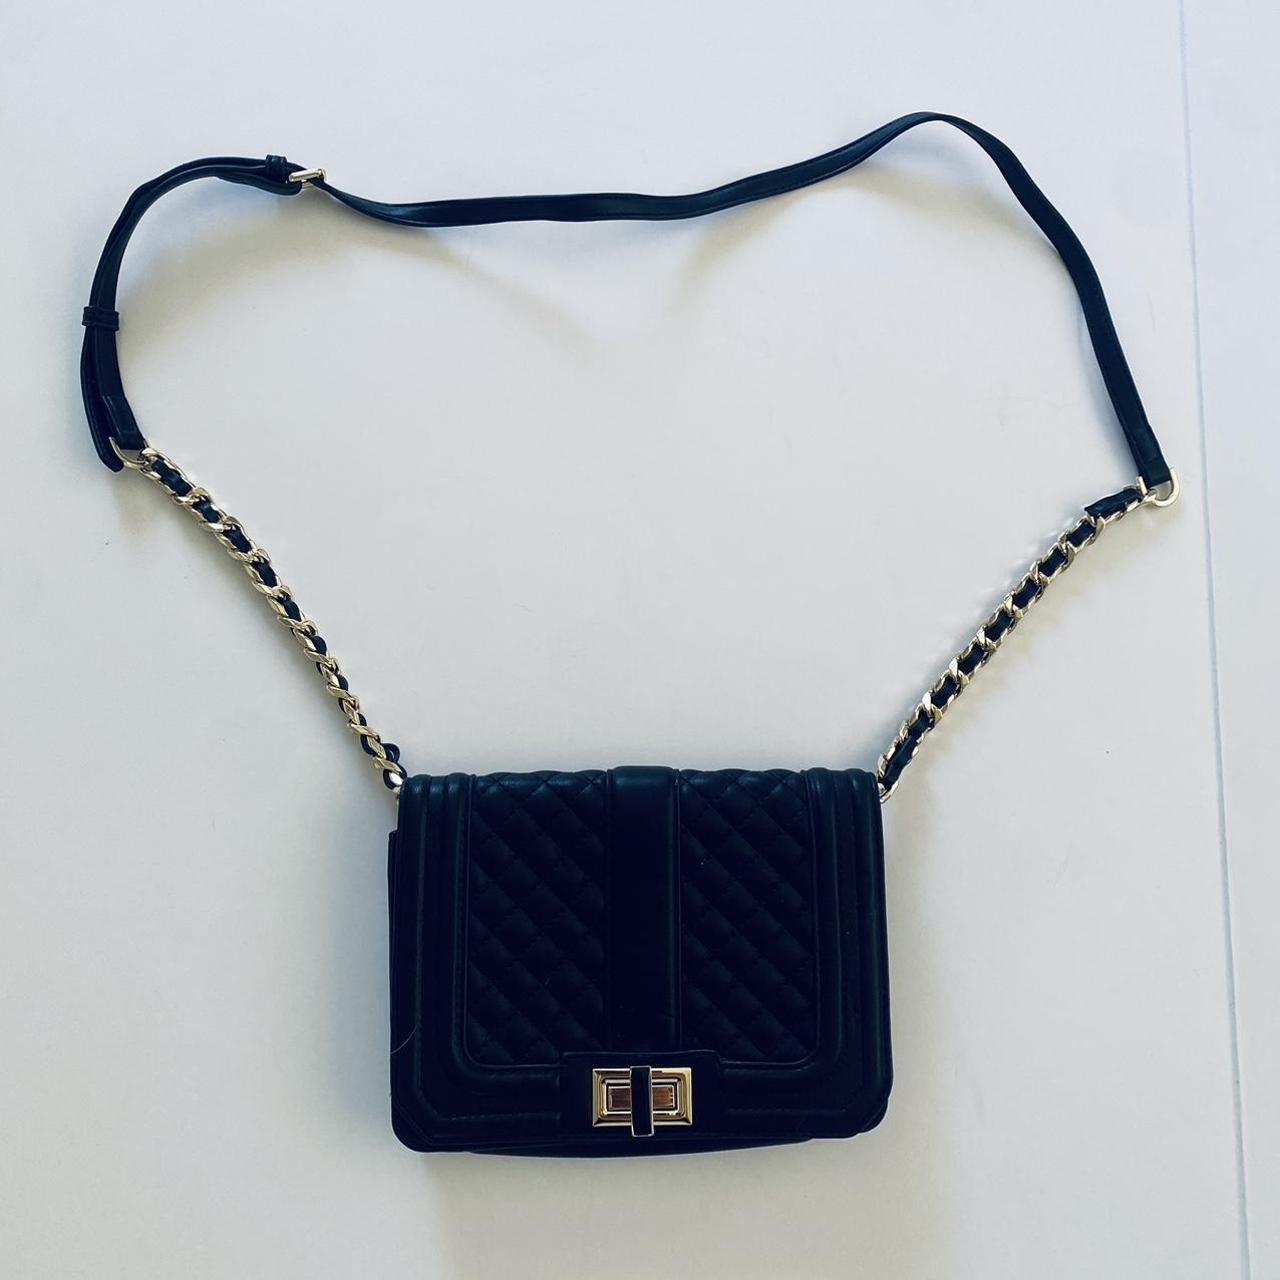 Genuine guess luxe black and gold quilted leather - Depop